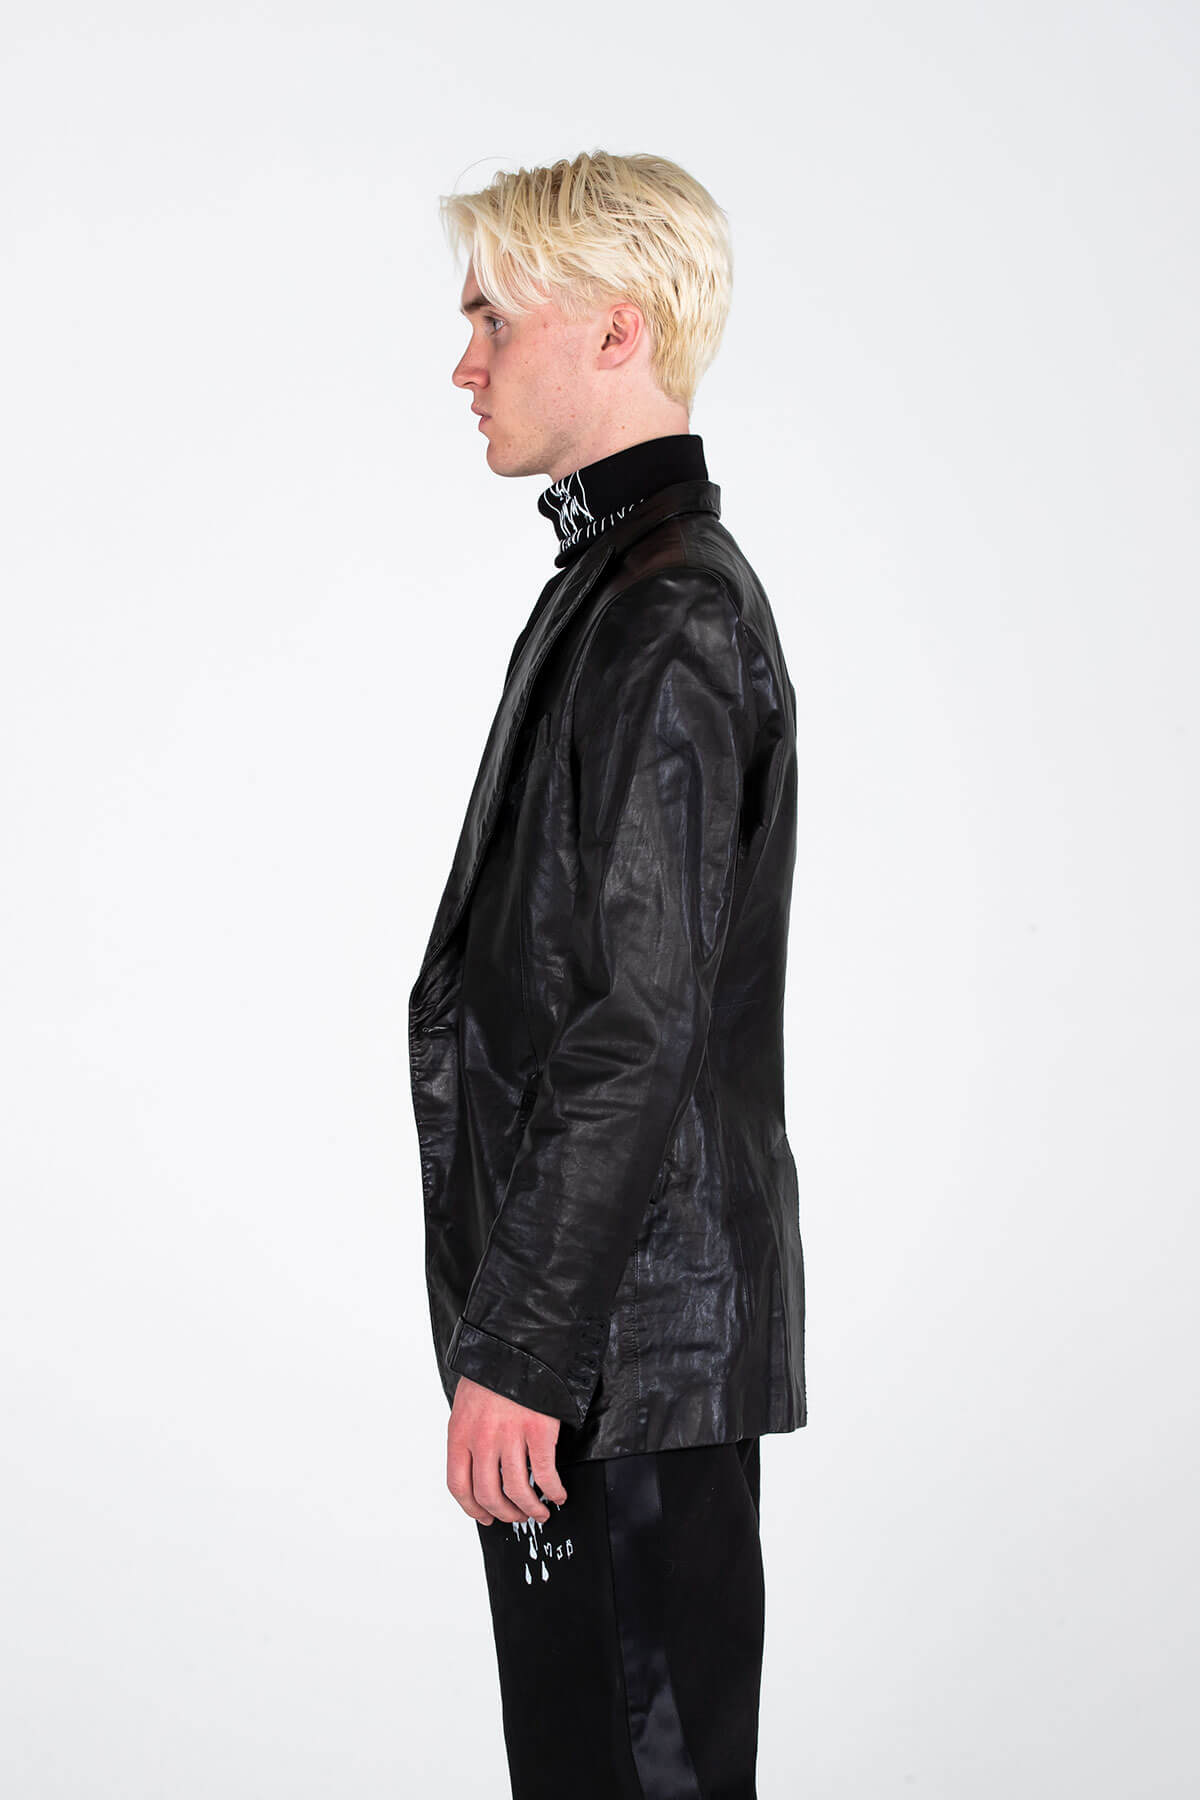 CLASSIC LEATHER JACKET – HAND CRAFTED - ARCHIVE JACKET - MJB